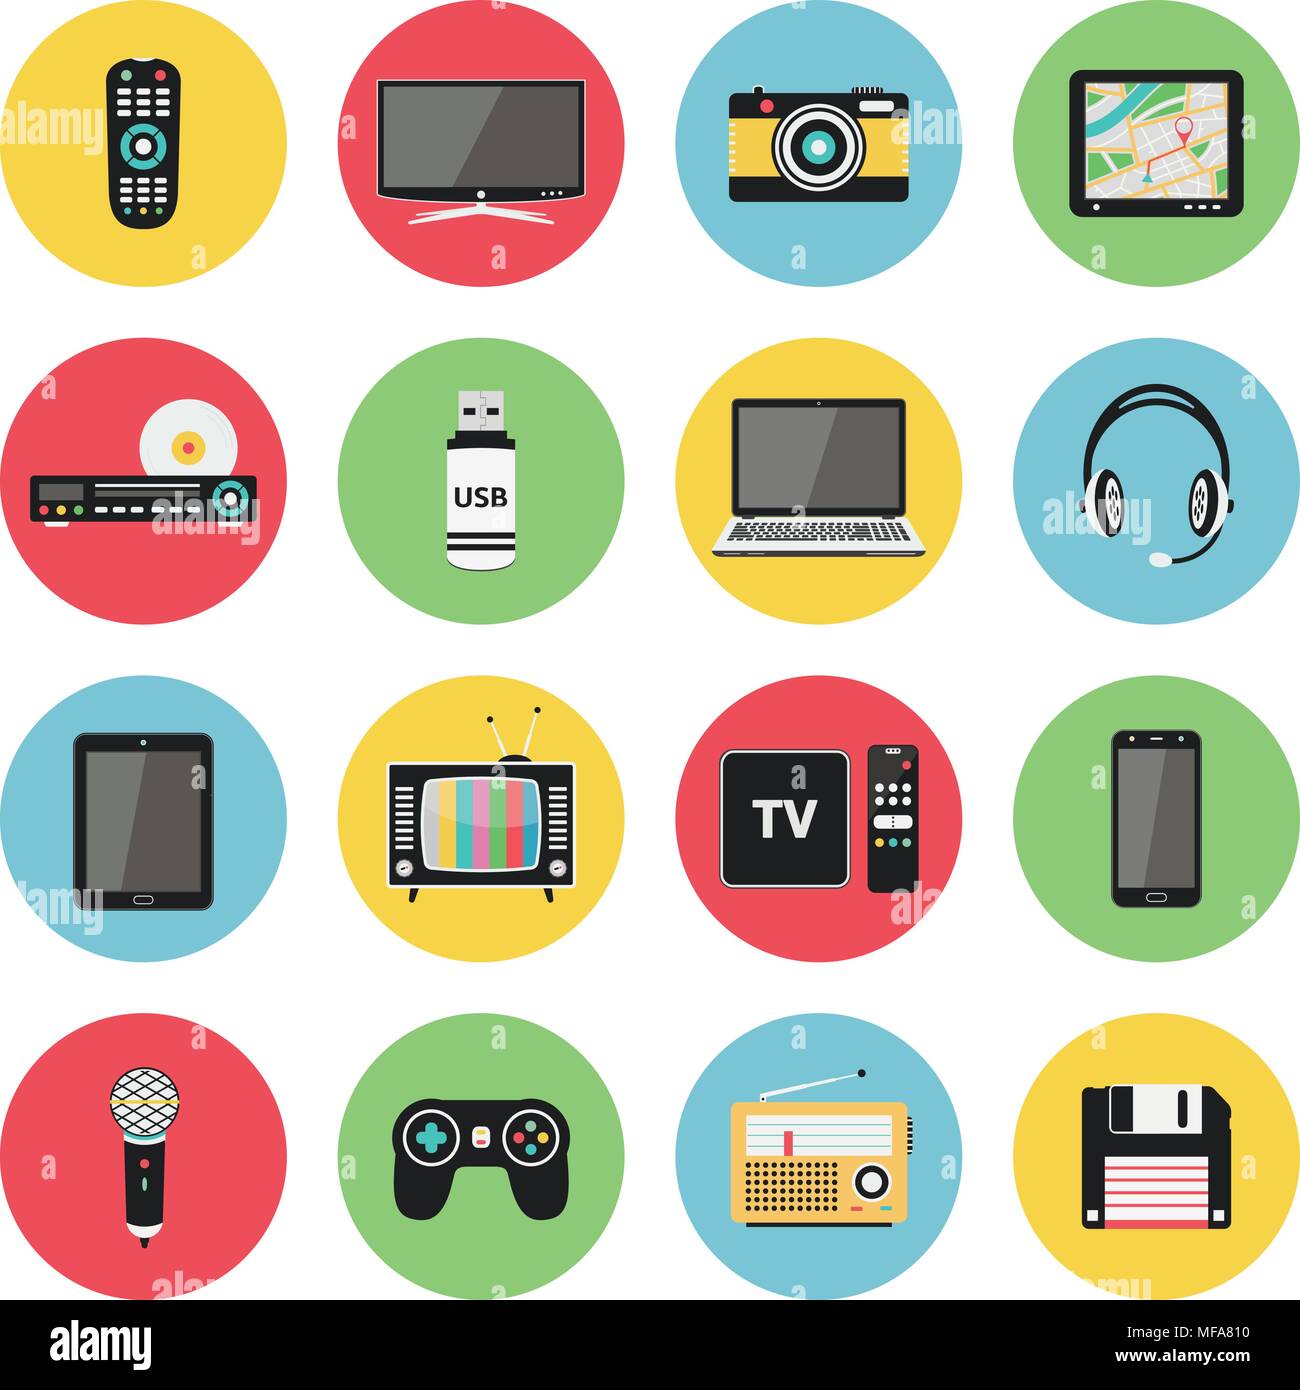 https://c8.alamy.com/comp/MFA810/flat-icons-set-of-multimedia-and-technology-devices-audio-and-video-items-and-objects-vector-illustration-MFA810.jpg